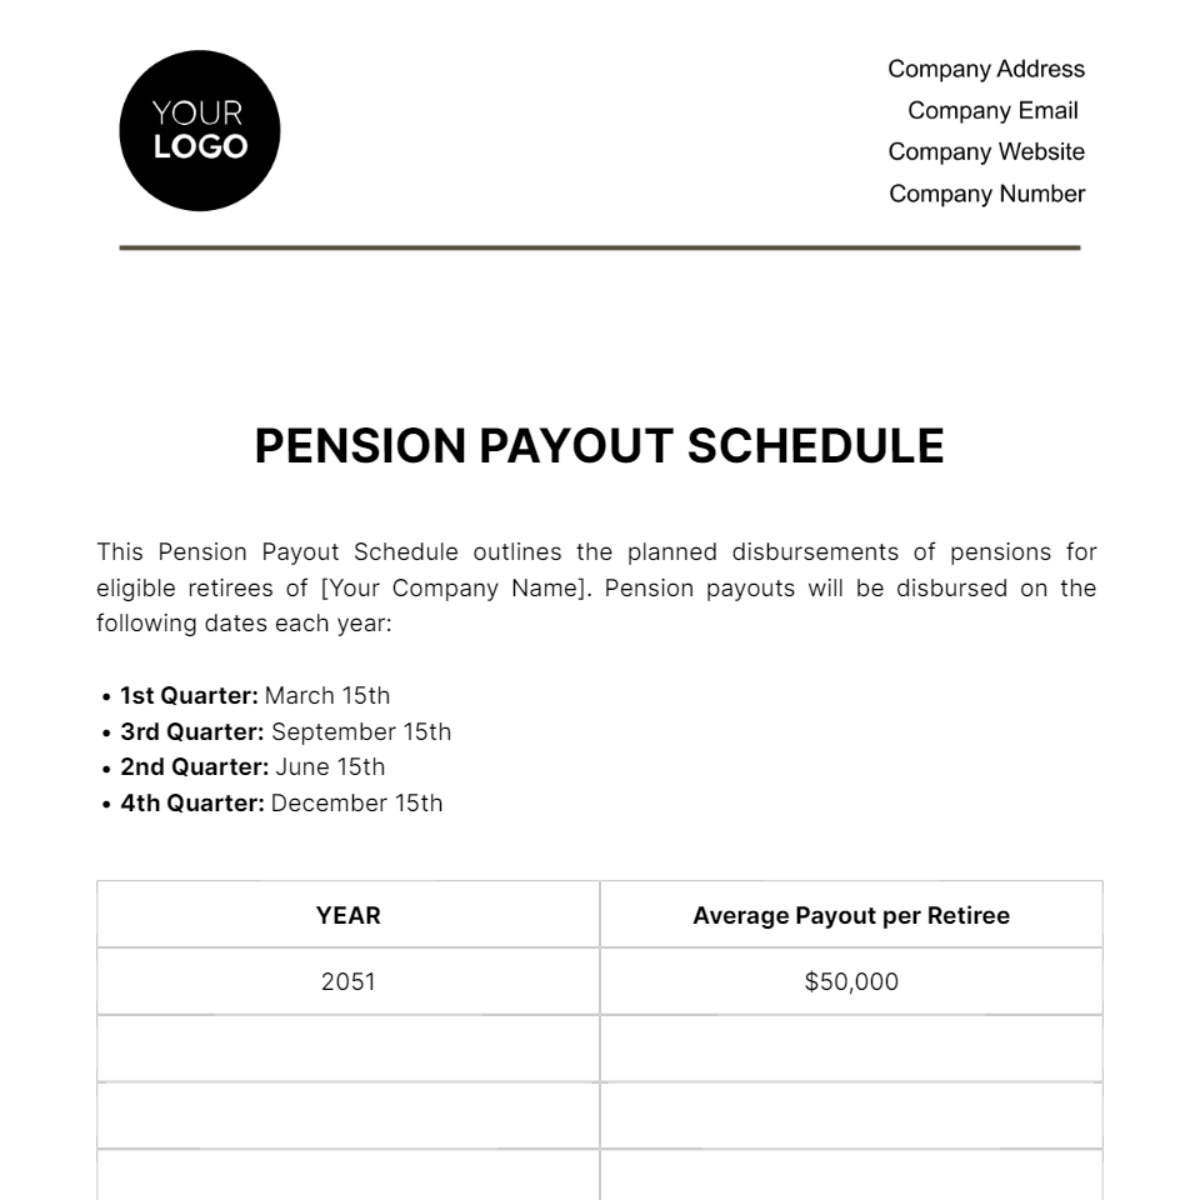 Pension Payout Schedule HR Template